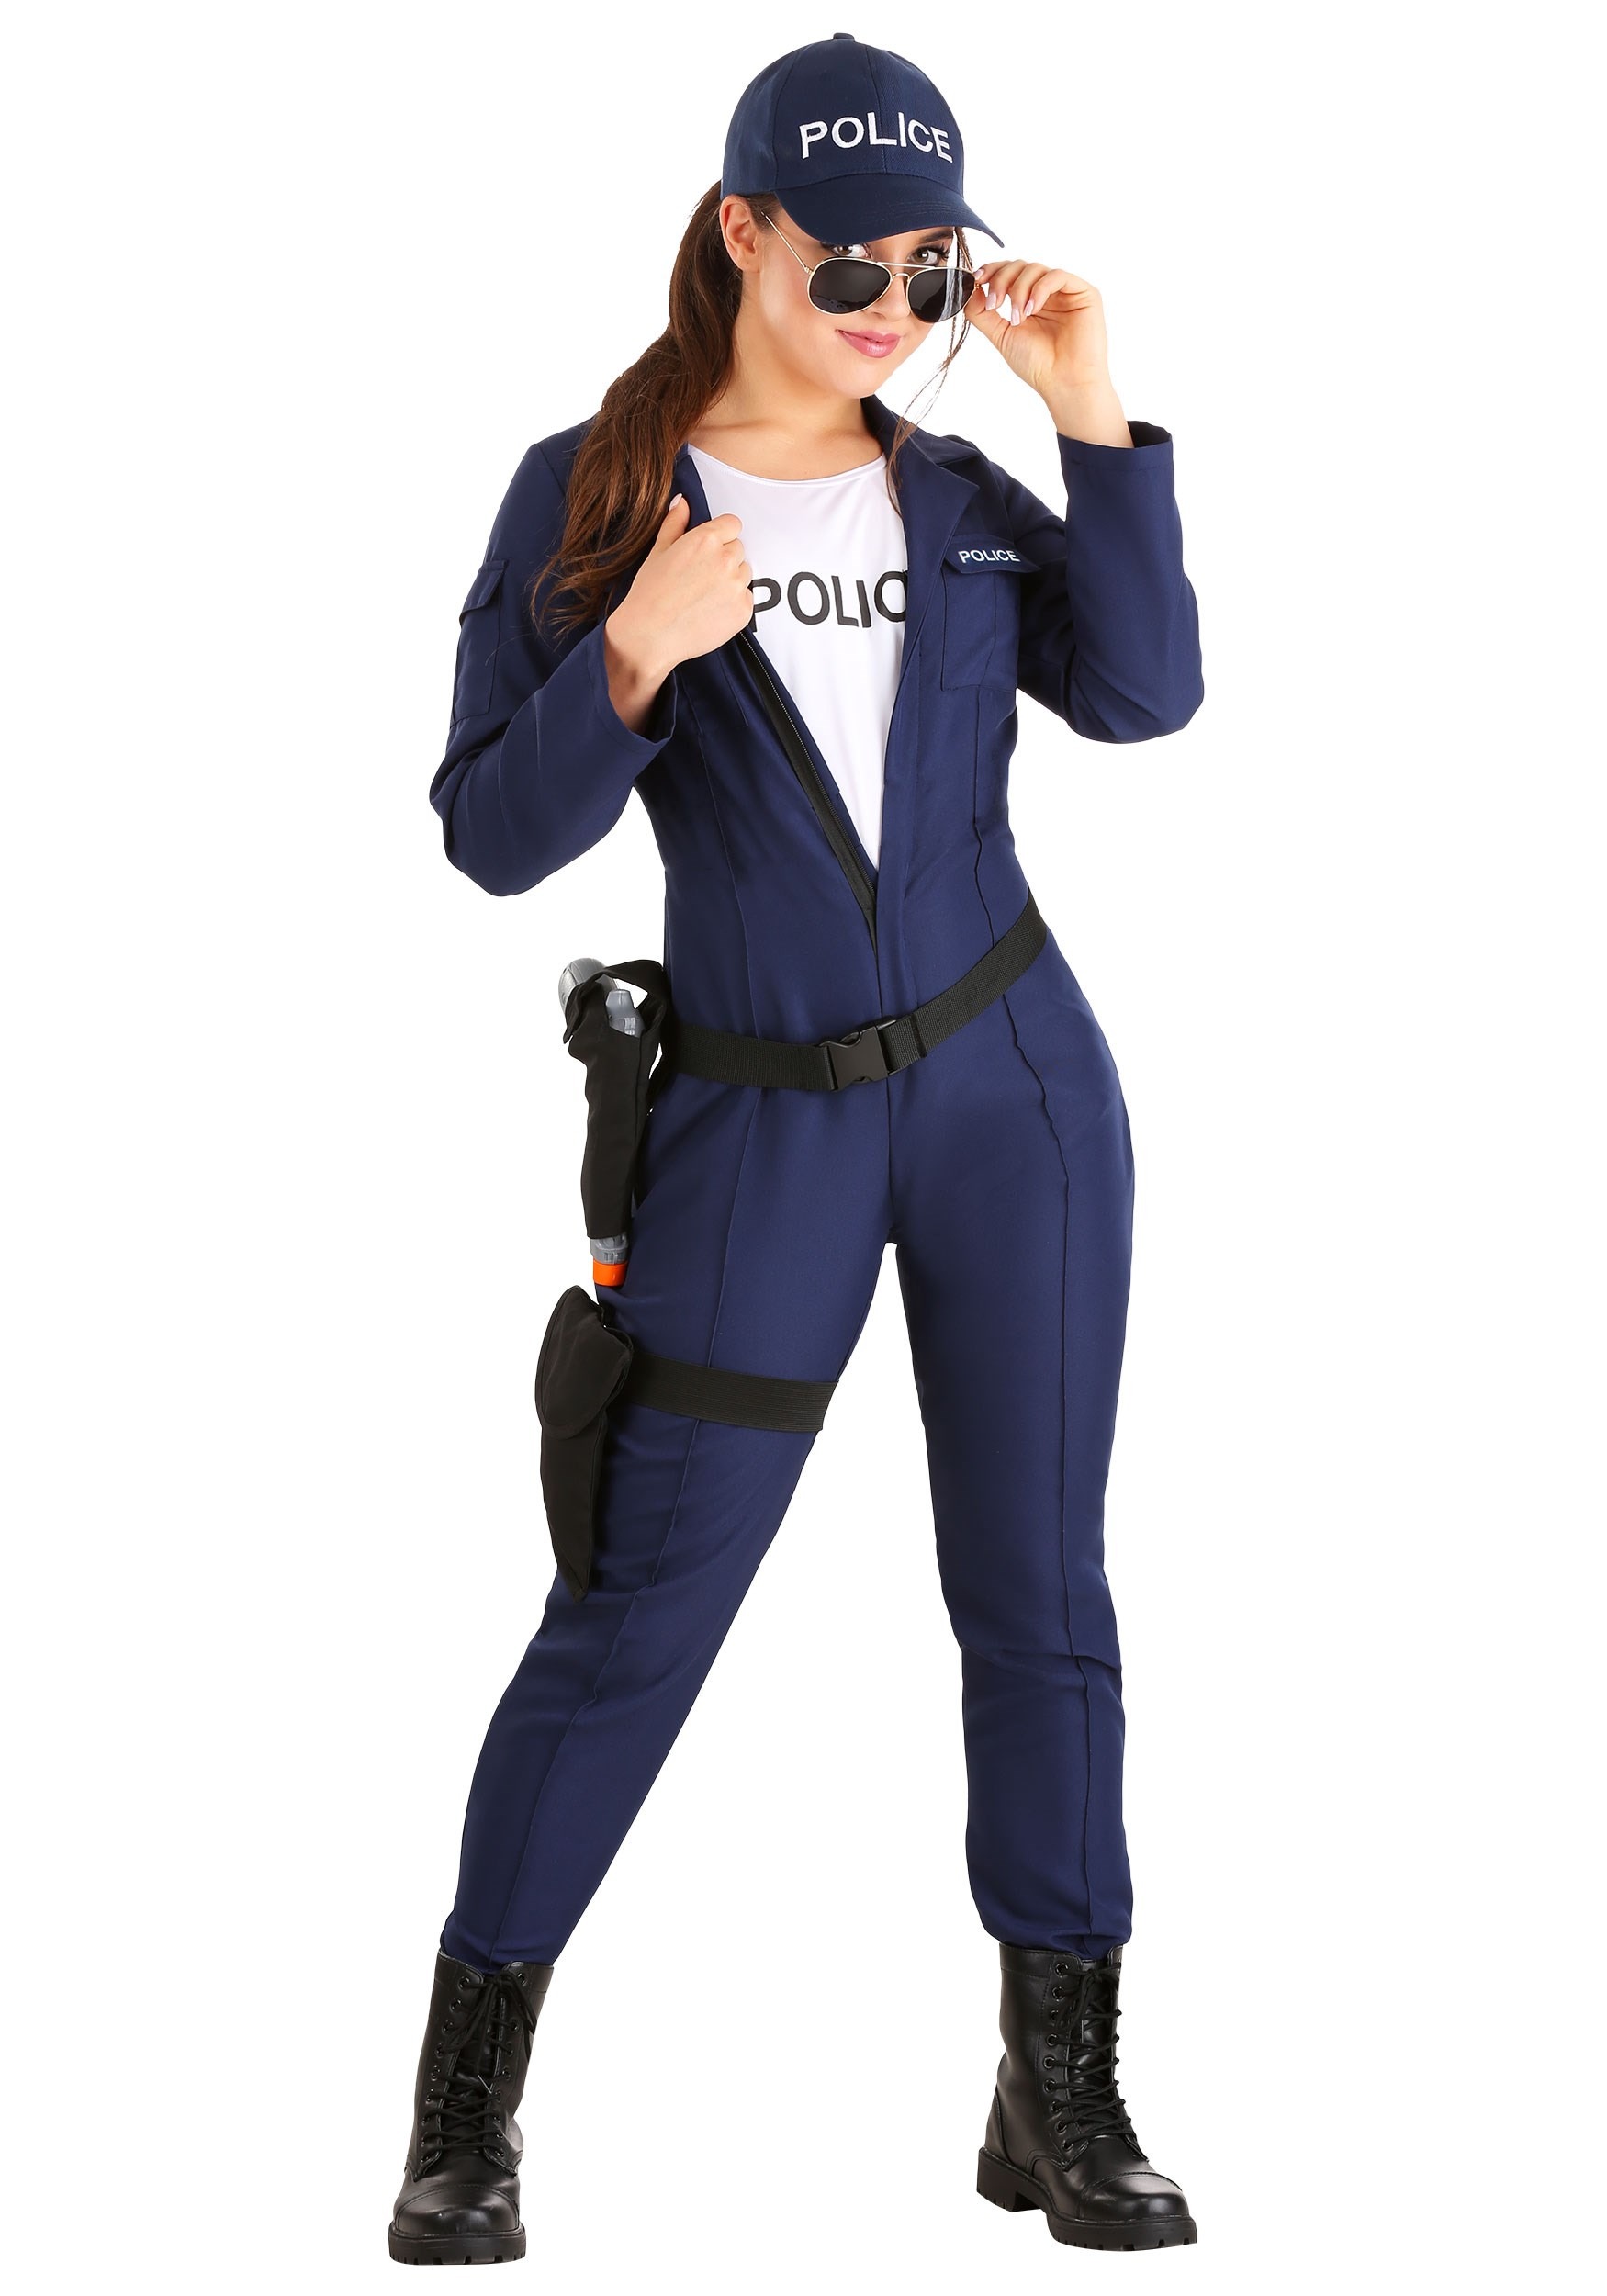 Police Costume - Embroidery Personalized! + FREE Police Hat!